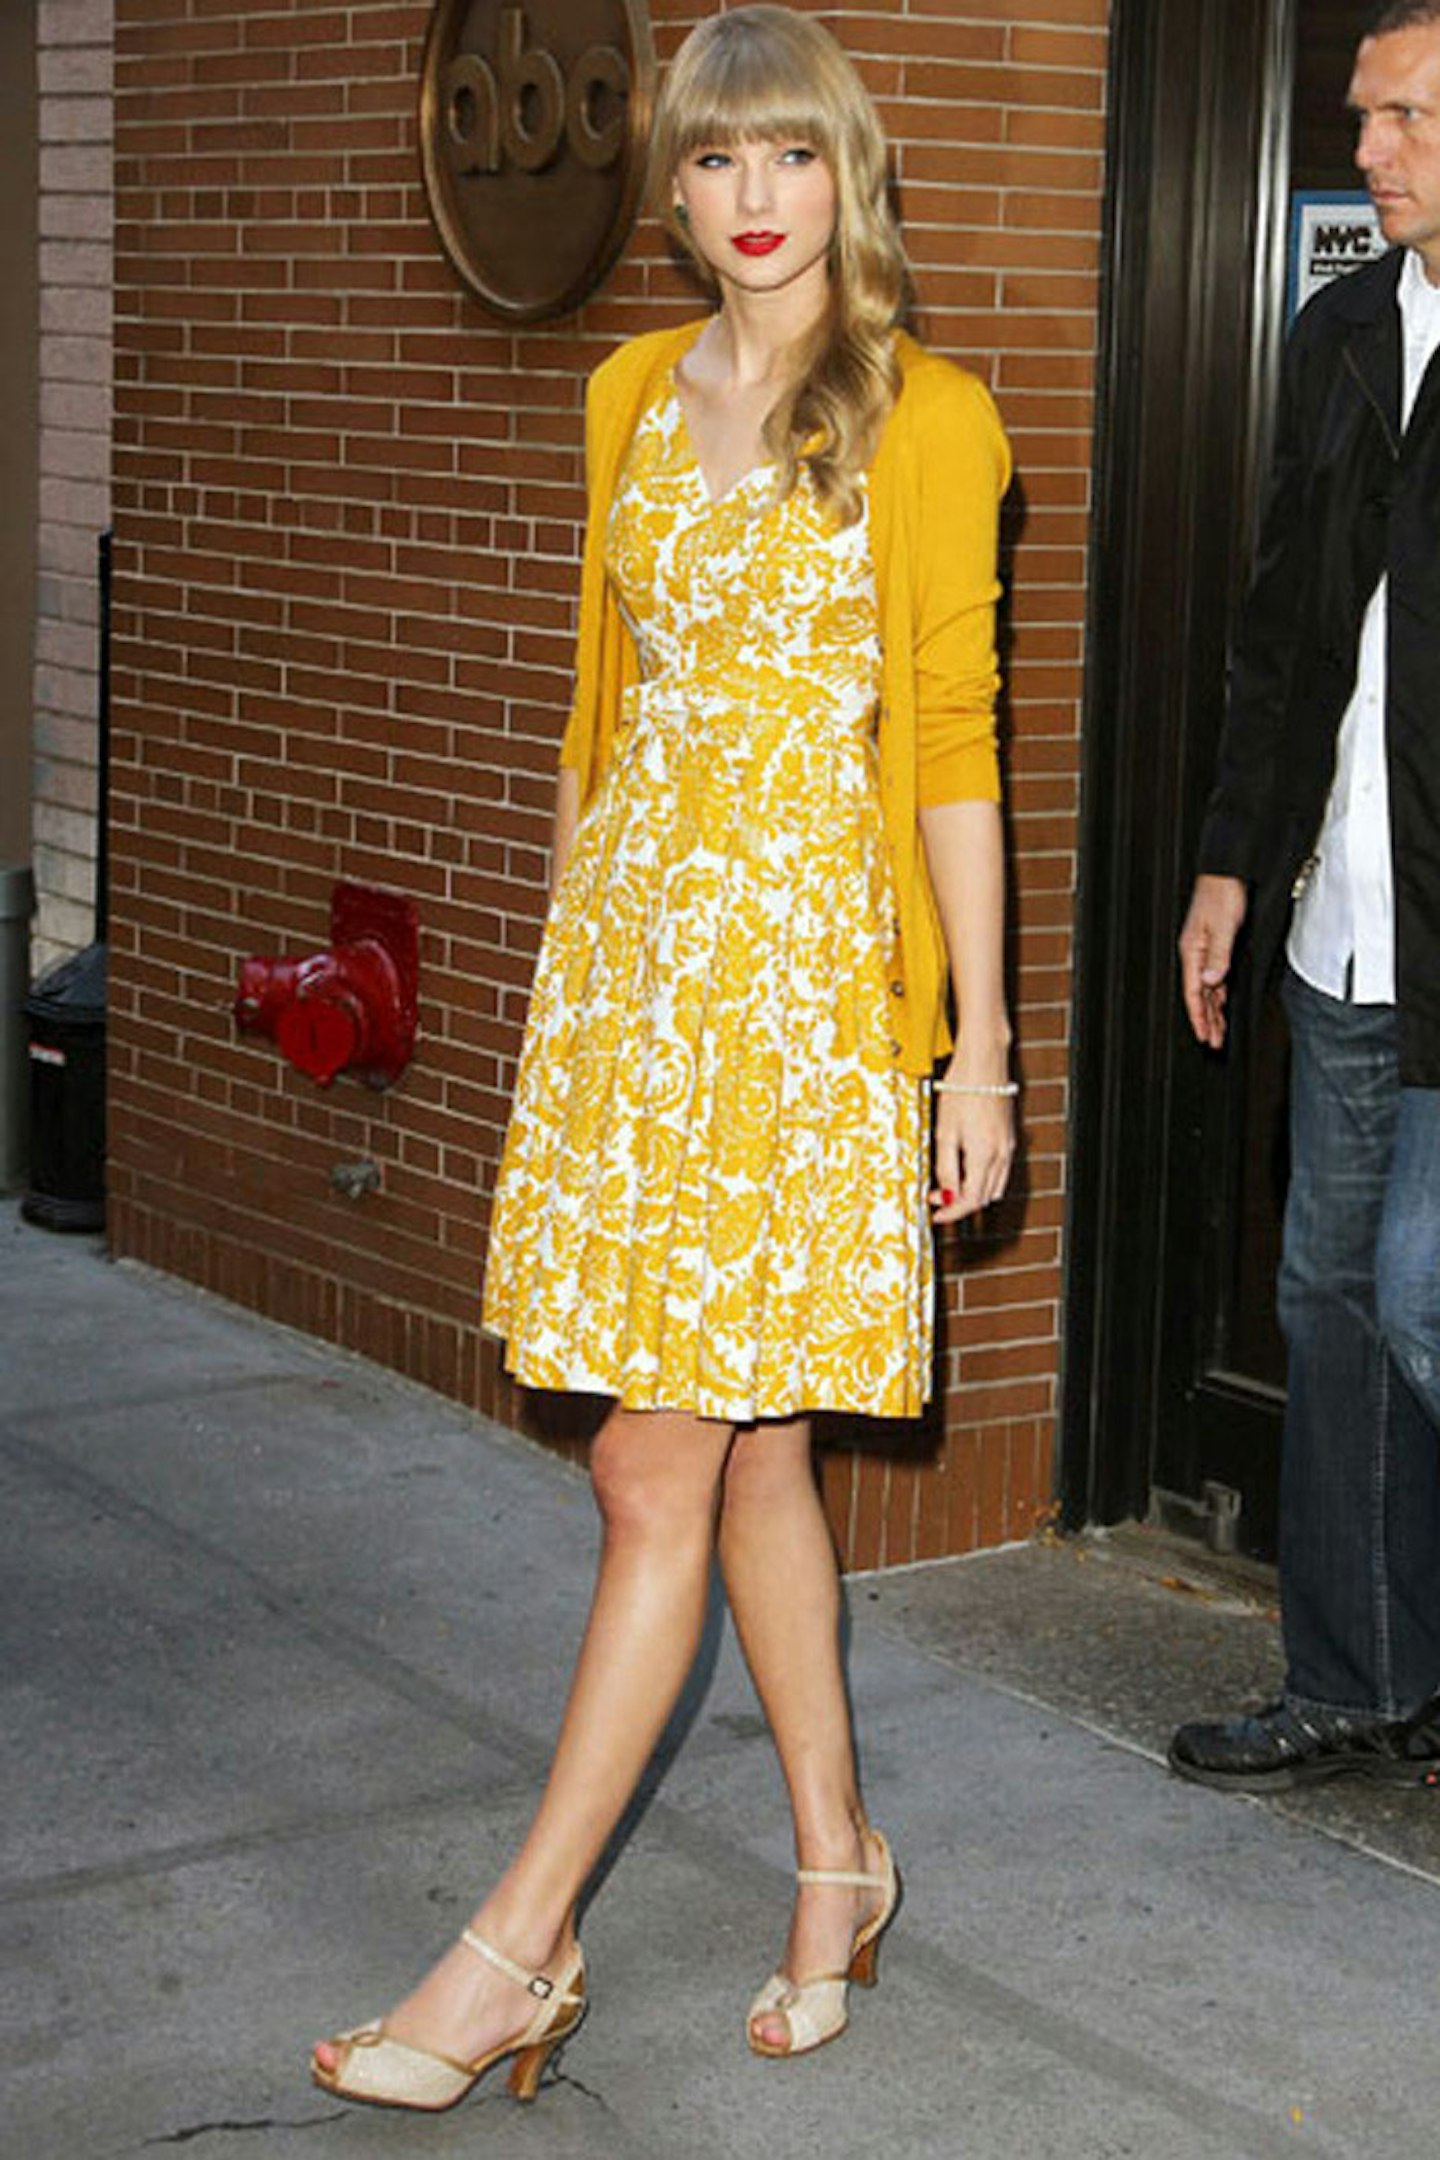 Taylor Swift at the ABC Studios in New York - 22 October 2012